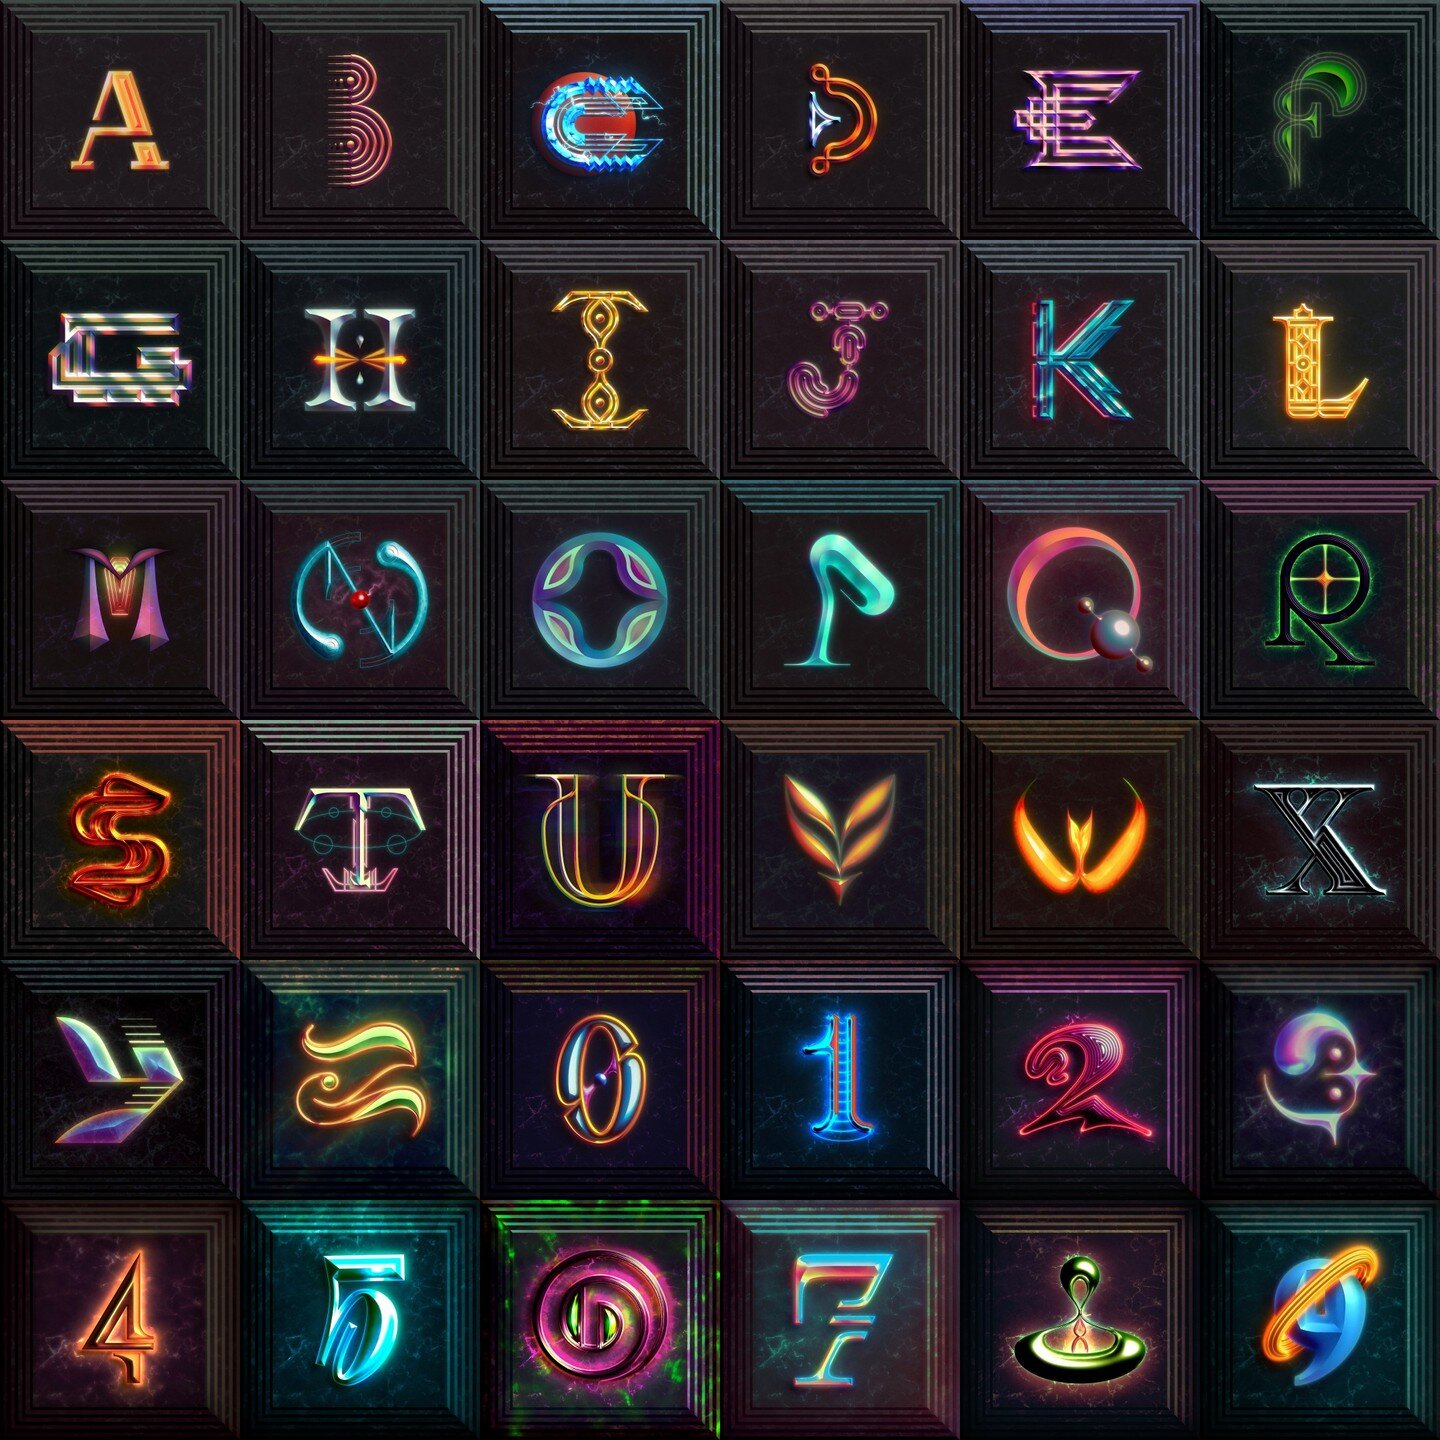 Full set! I used this year's #36daysoftype to further explore the limits of Illustrator's new 3D tool, plus practice with Photoshop and shoring up those skills I've let languish over the years. The limiting factor of using a bevel for each design (so